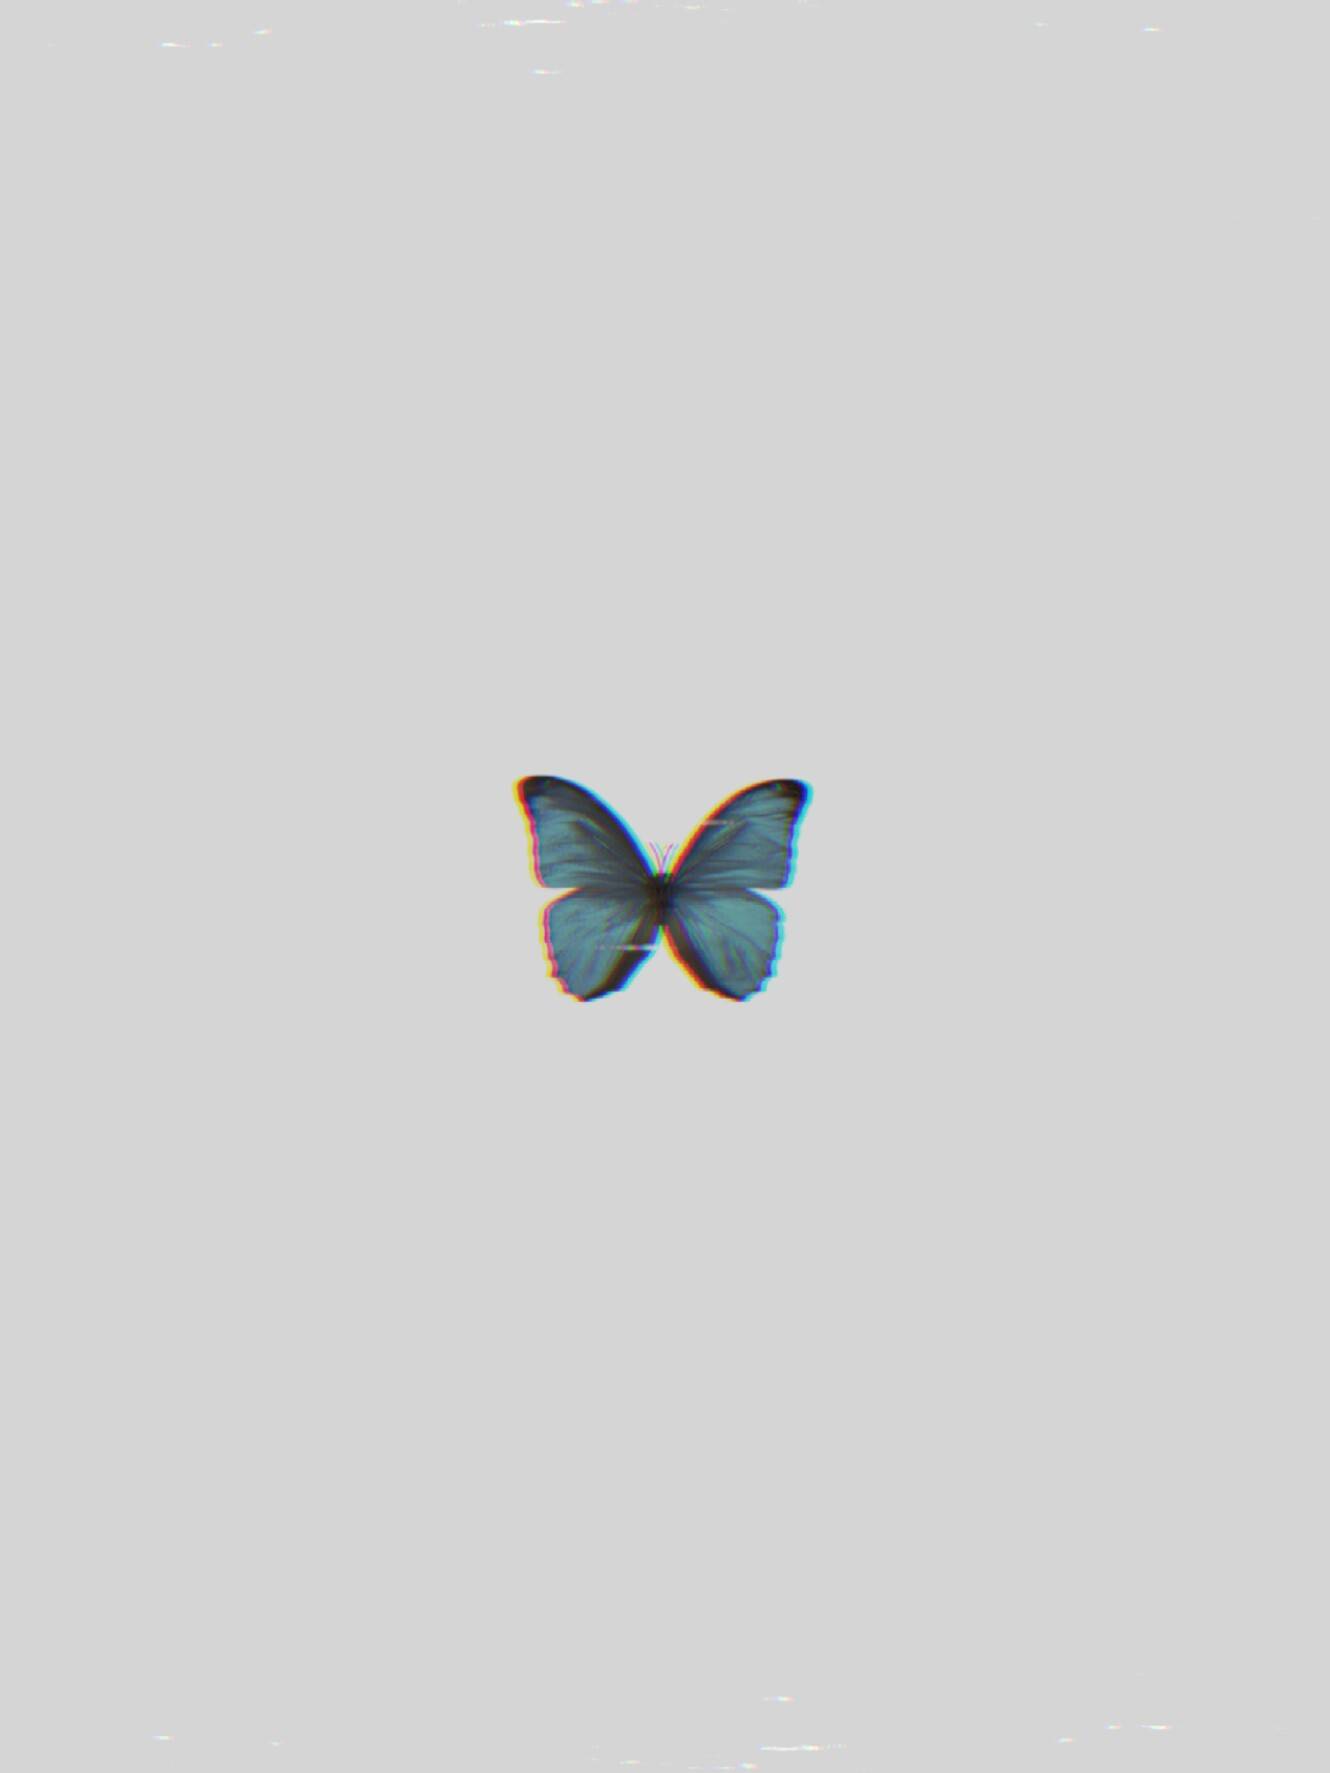 Aesthetic Butterfly IPhone Wallpapers Wallpaper Cave | manminchurch.se